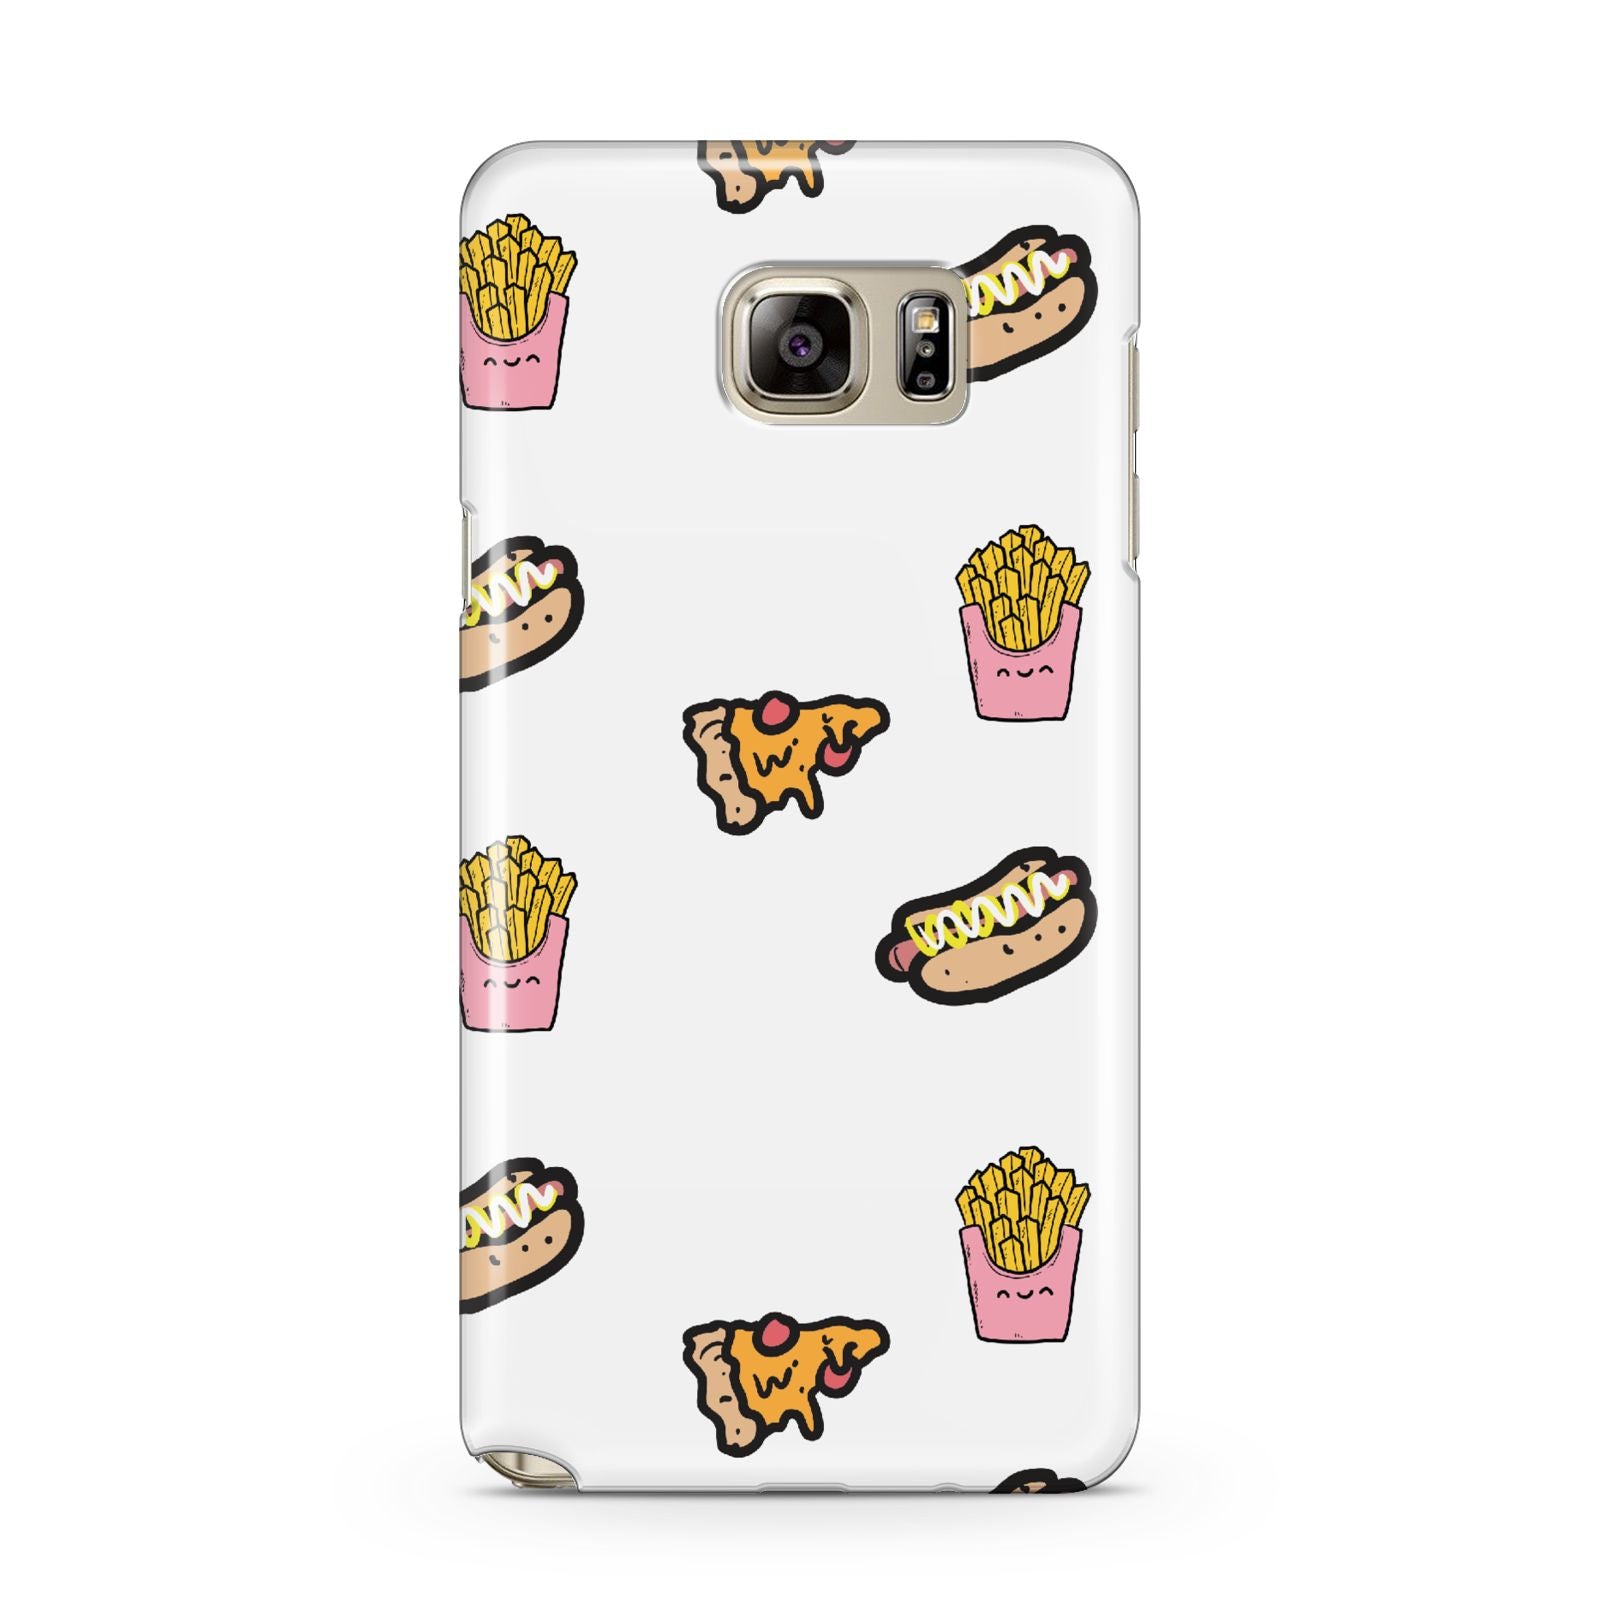 Fries Pizza Hot Dog Samsung Galaxy Note 5 Case